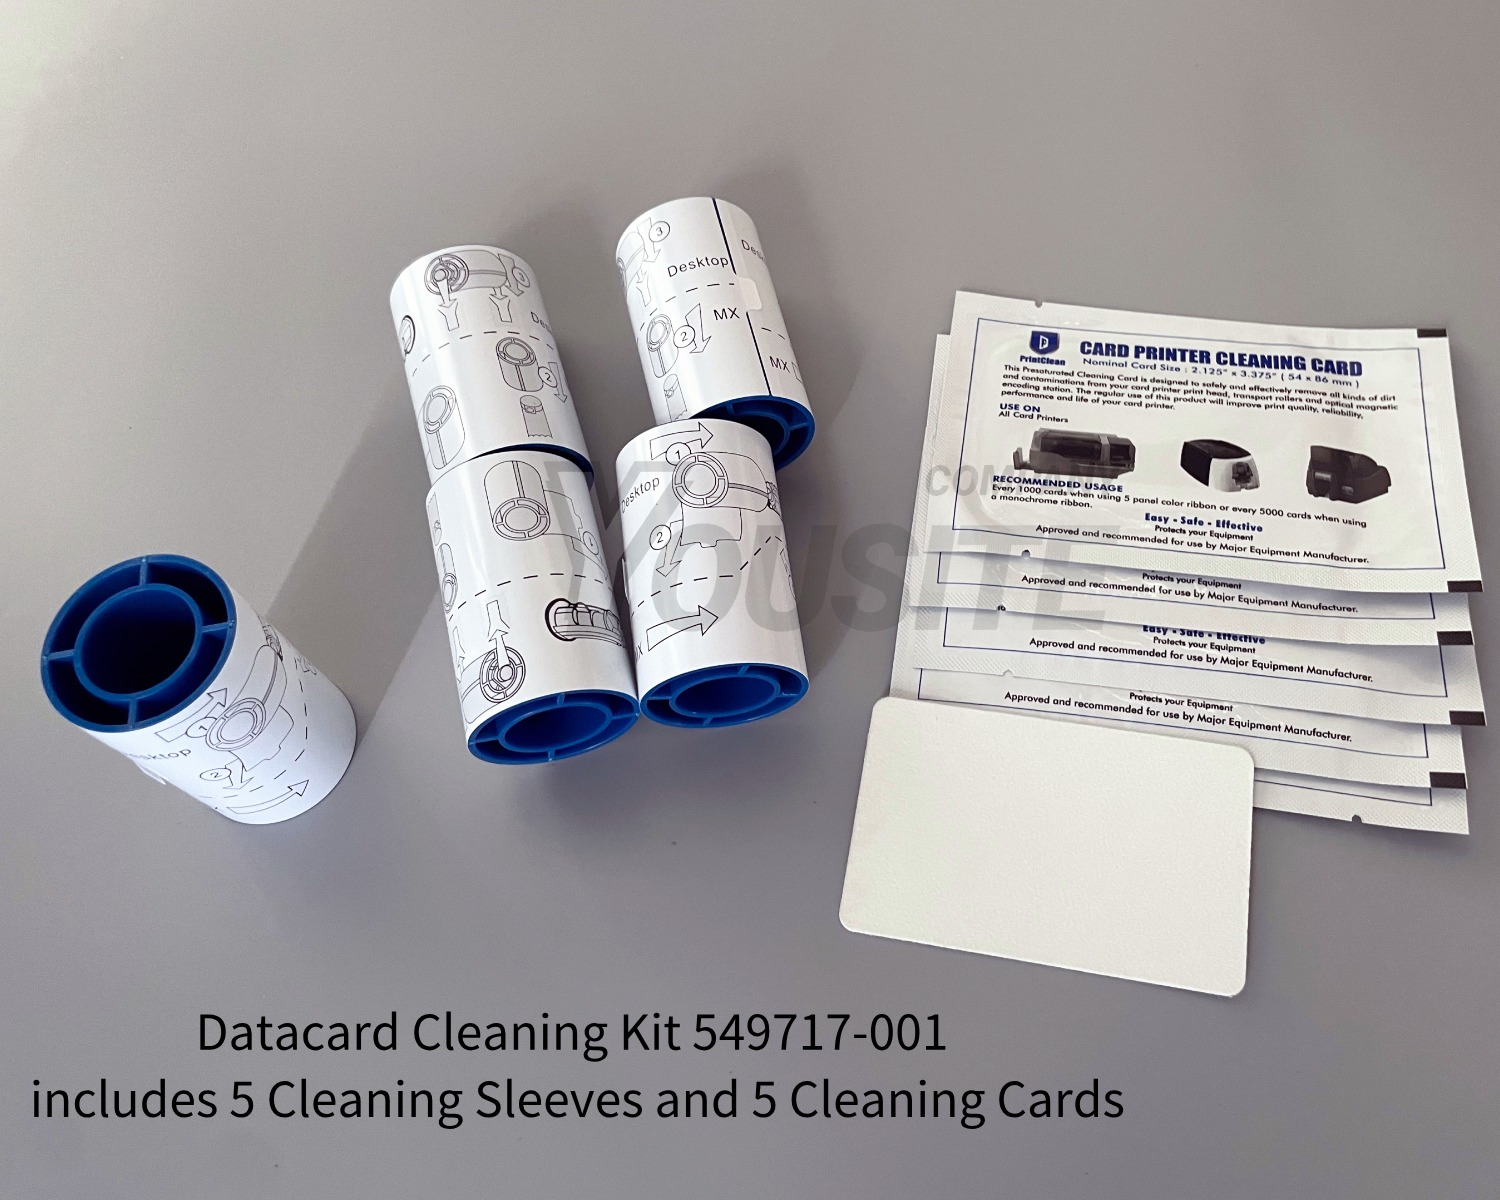 Entrust Datacard 549717-001 cleaning kits include 5 cleaning sleeves, and 5 cleaning cards to clean the card rollers. 